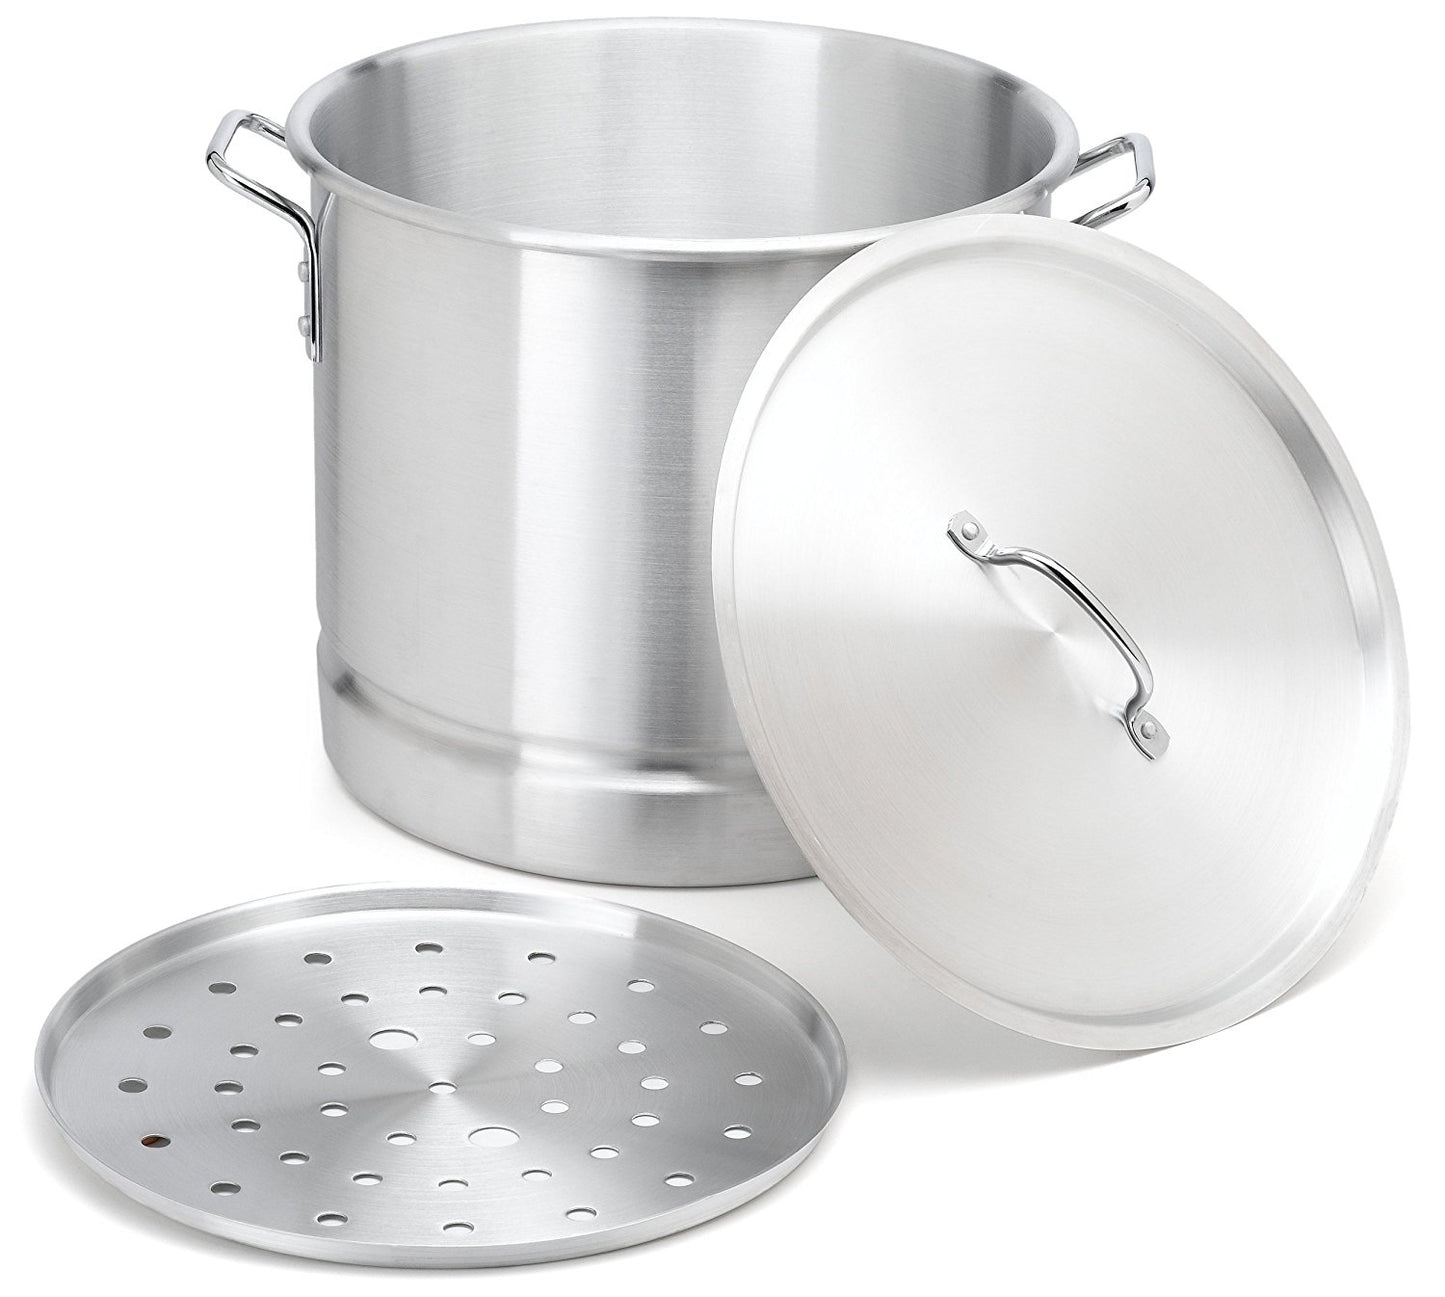 Bene Casa 60Qt Stainless Steel Boiling Pot with Strainer Basket and Li